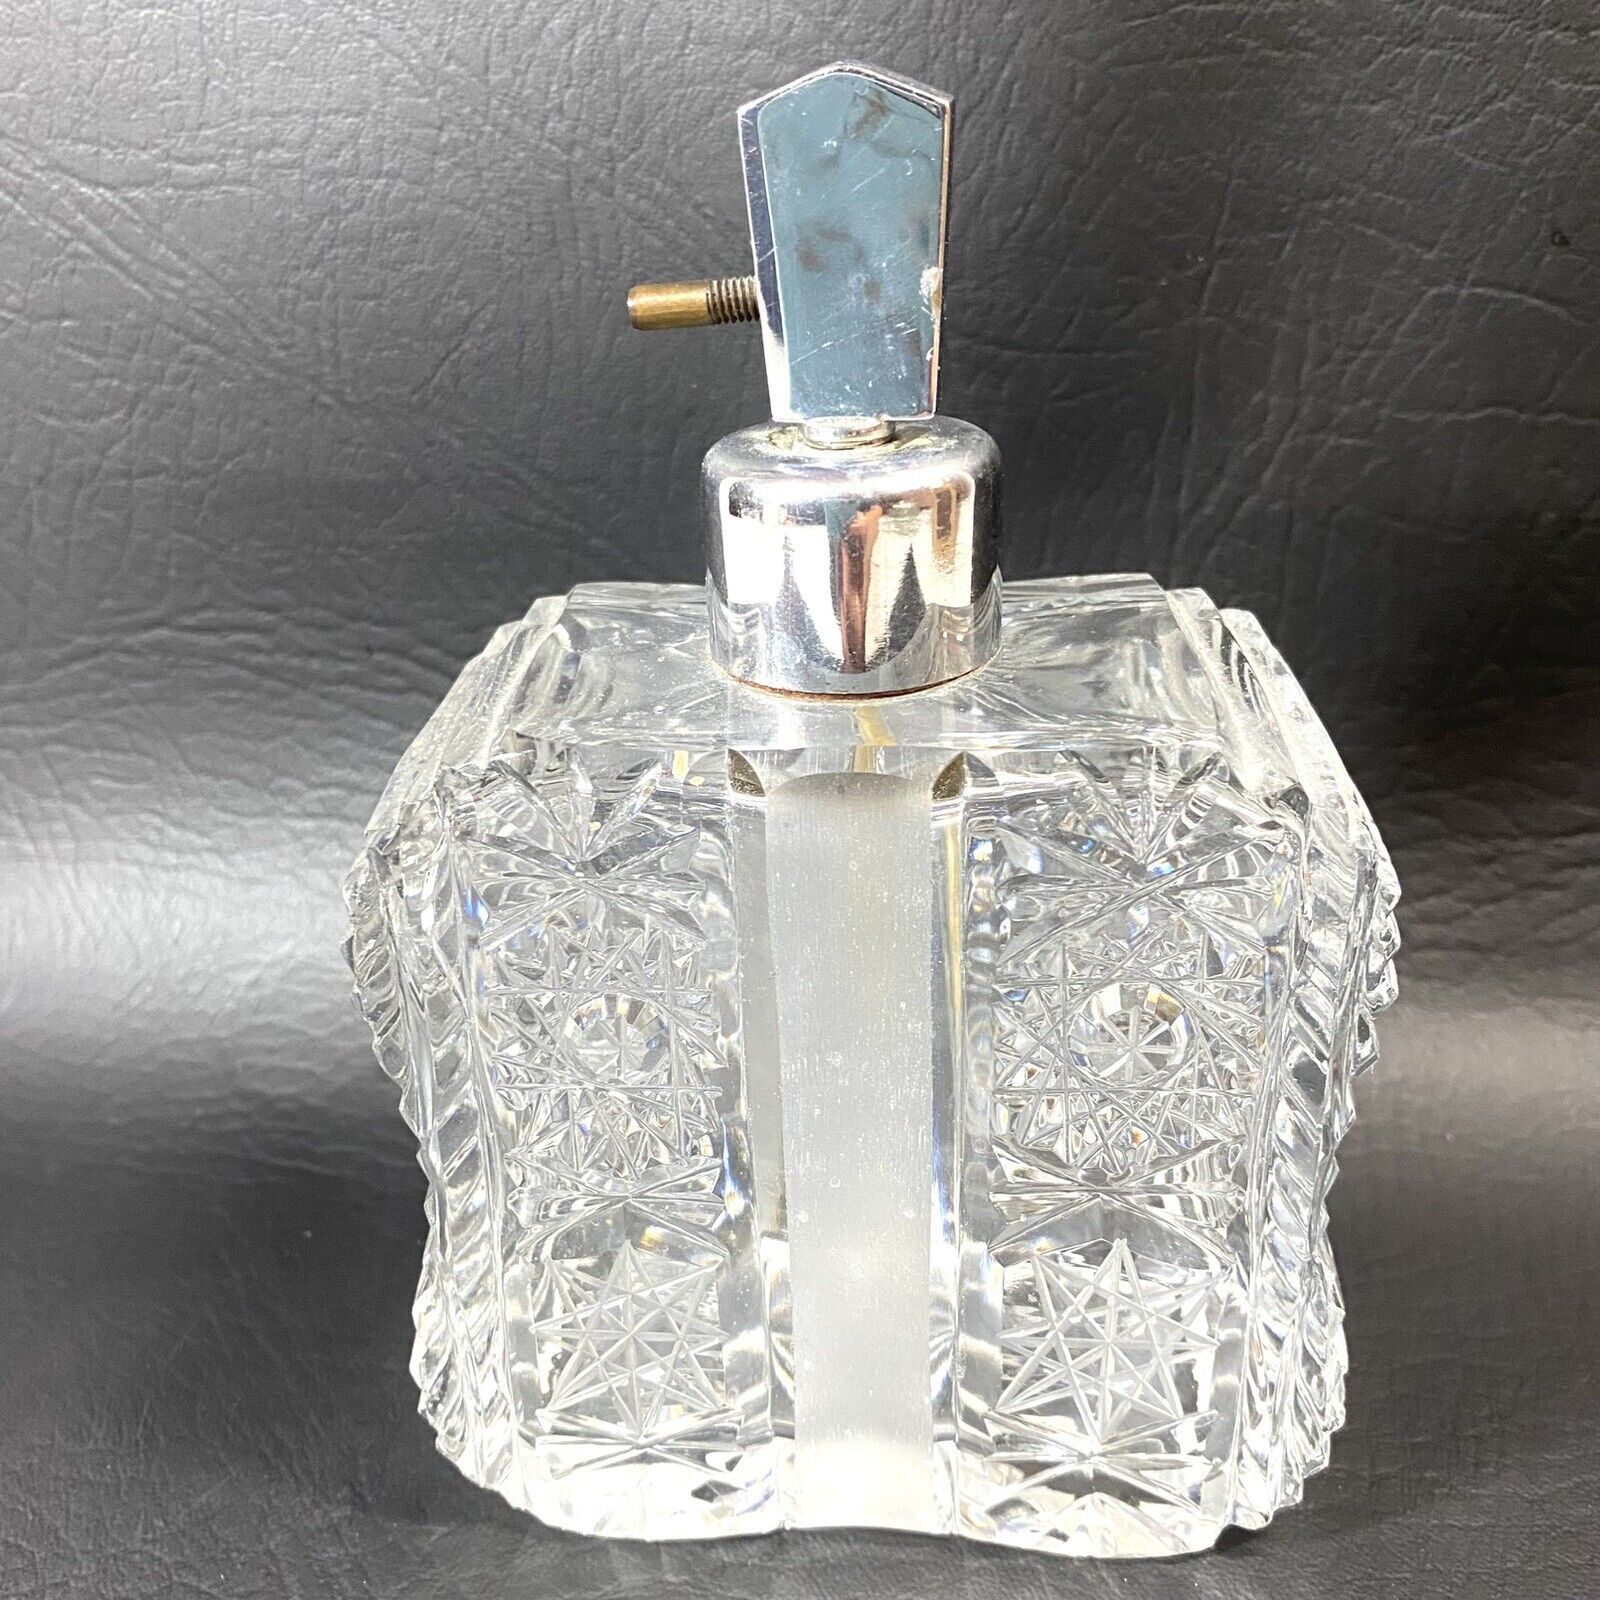 1930s Vintage Thick Brilliant Cut Crystal Perfume Bottle Silver Cap Atomizer HTF